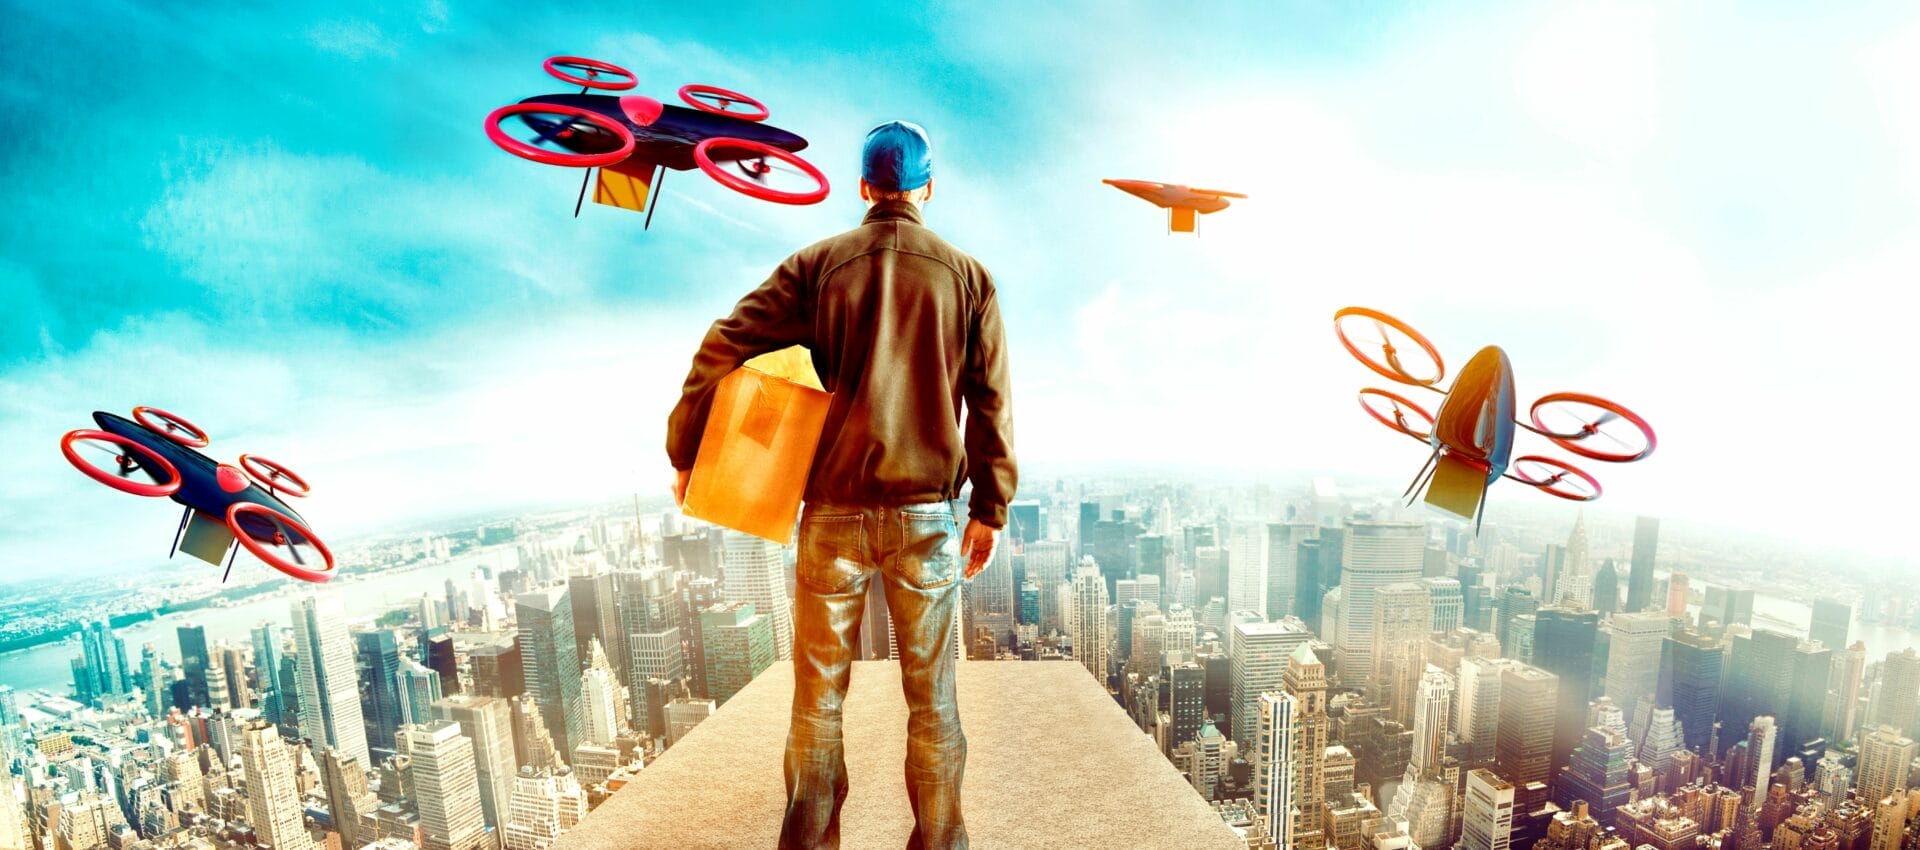 A person stands above the city holding a box while drones fly around them, also holding boxes.